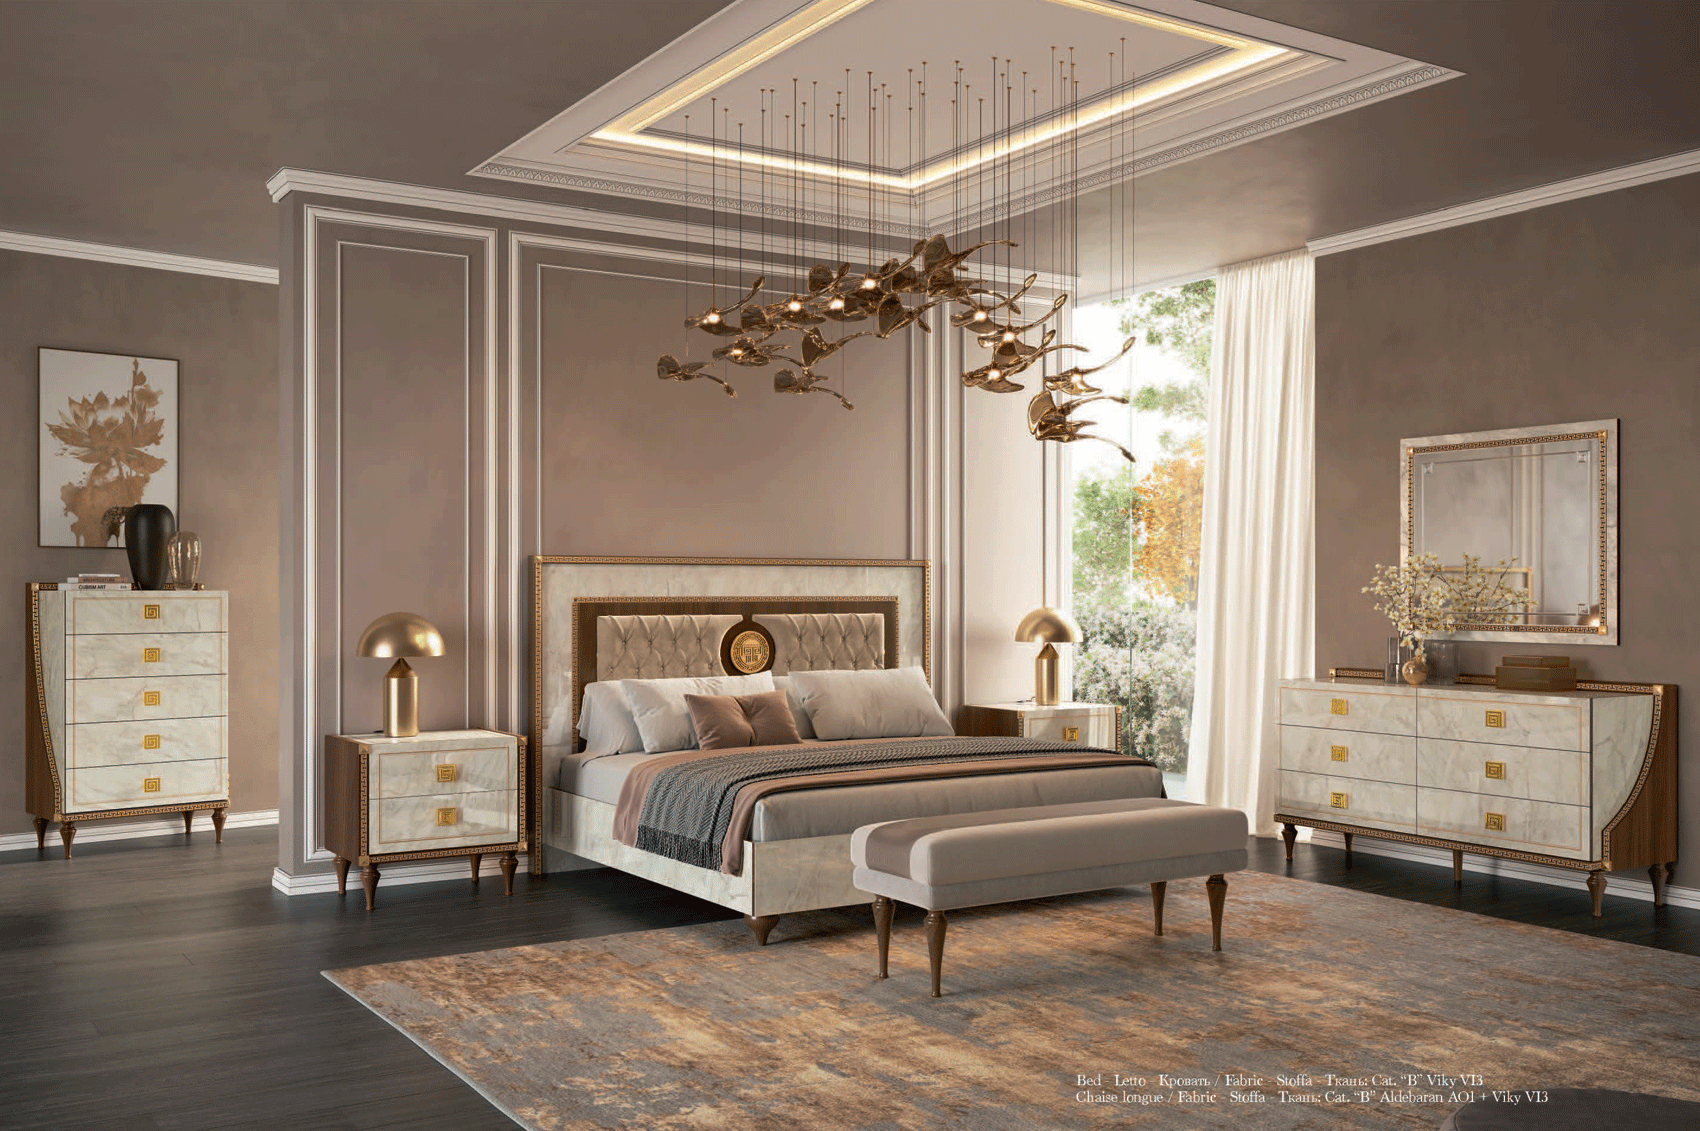 Brands Arredoclassic Dining Room, Italy Romantica Bedroom Additional Items